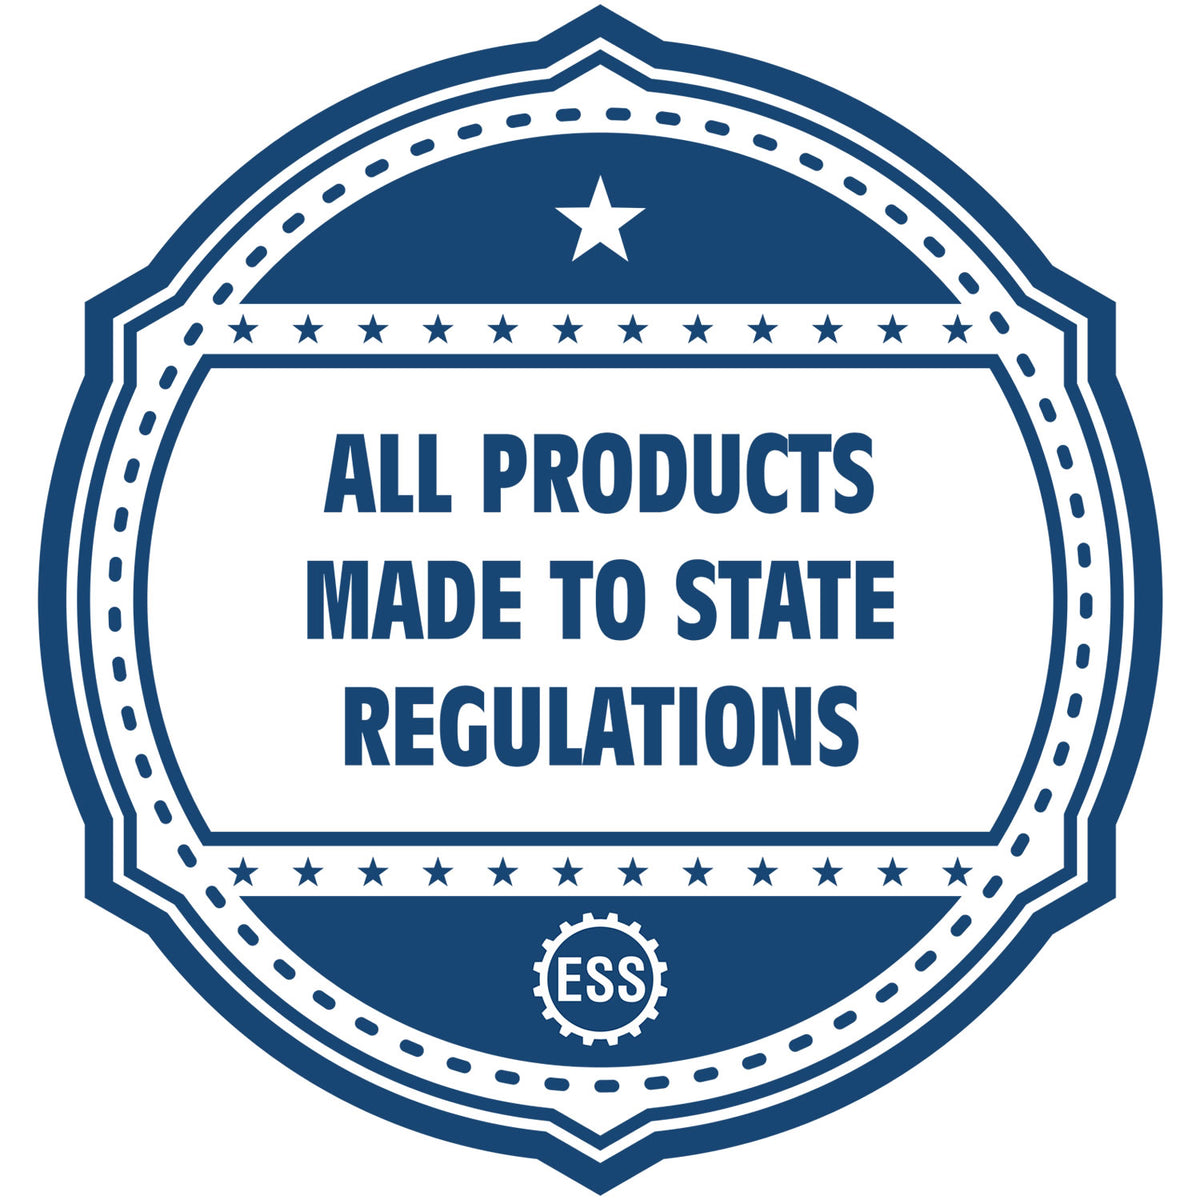 A blue icon or badge for the Hybrid Alabama Landscape Architect Seal showing that this product is made in compliance with state regulations.